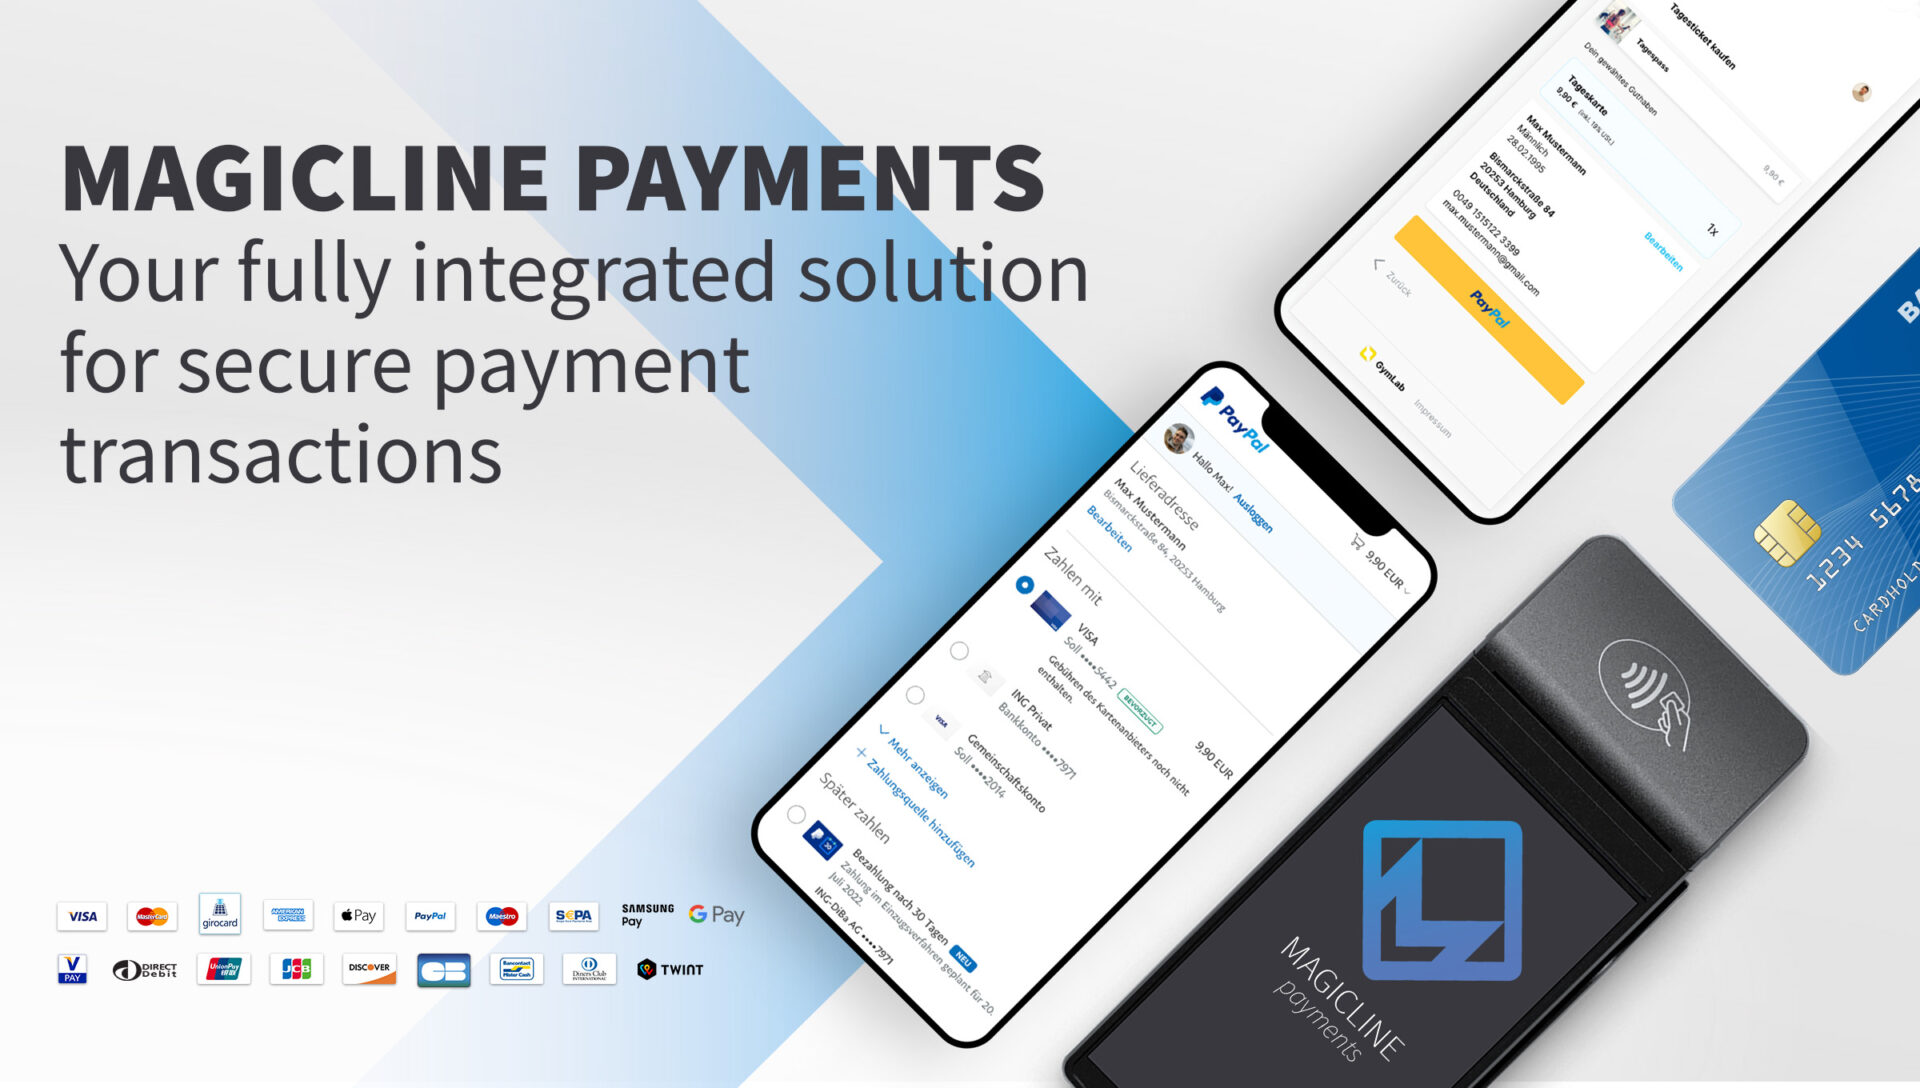 Image: Magicline Payments